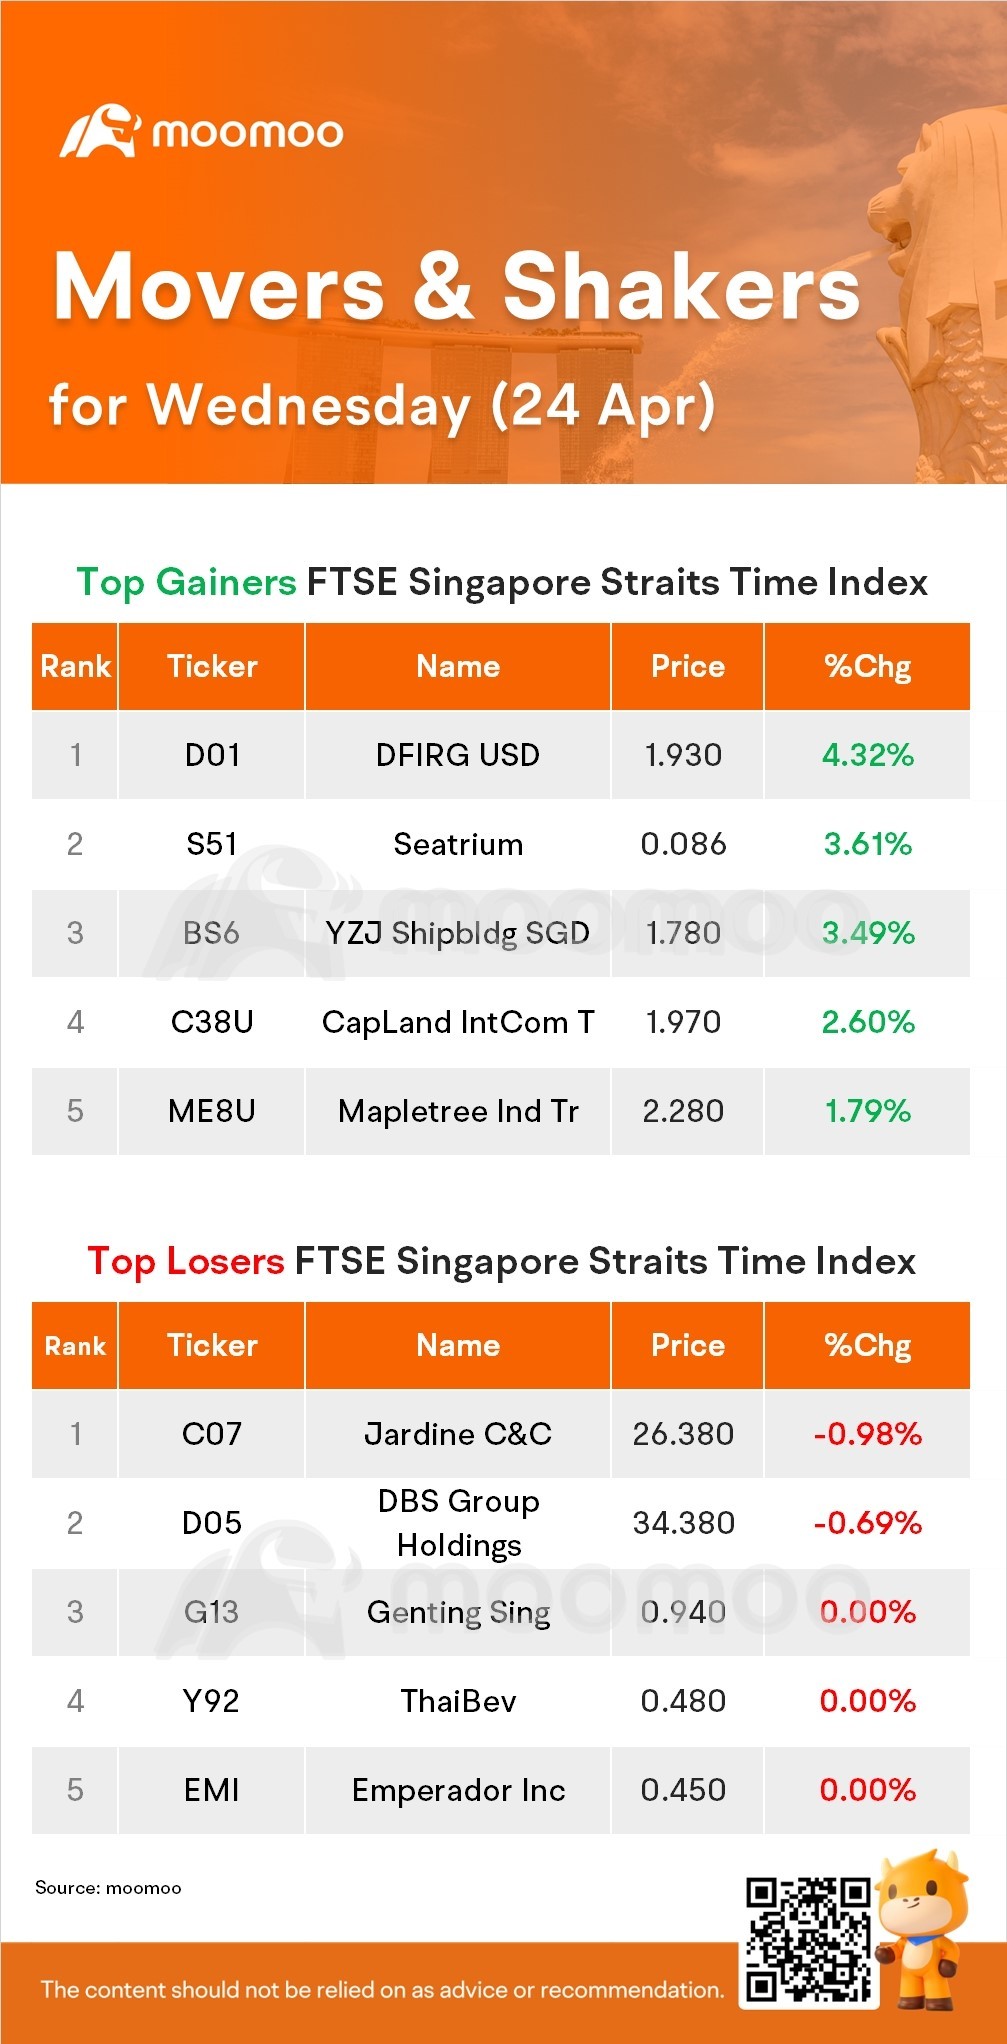 SG Movers for Wednesday: DFIRG USD Was the Top Gainer